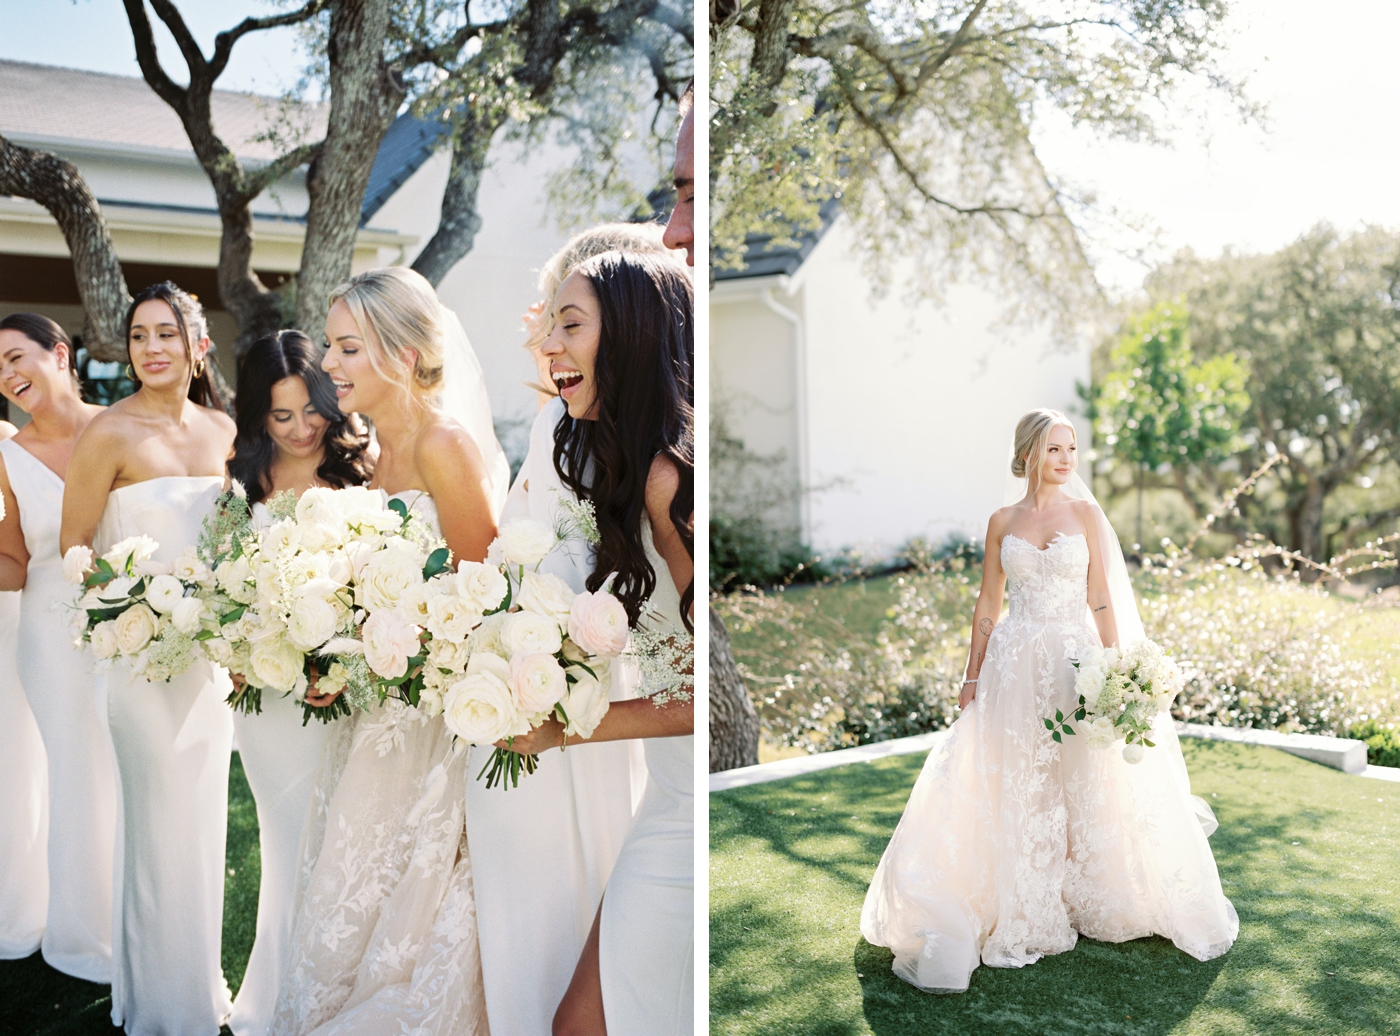 Bride and bridesmaids portraits at The Arlo in Austin, Texas